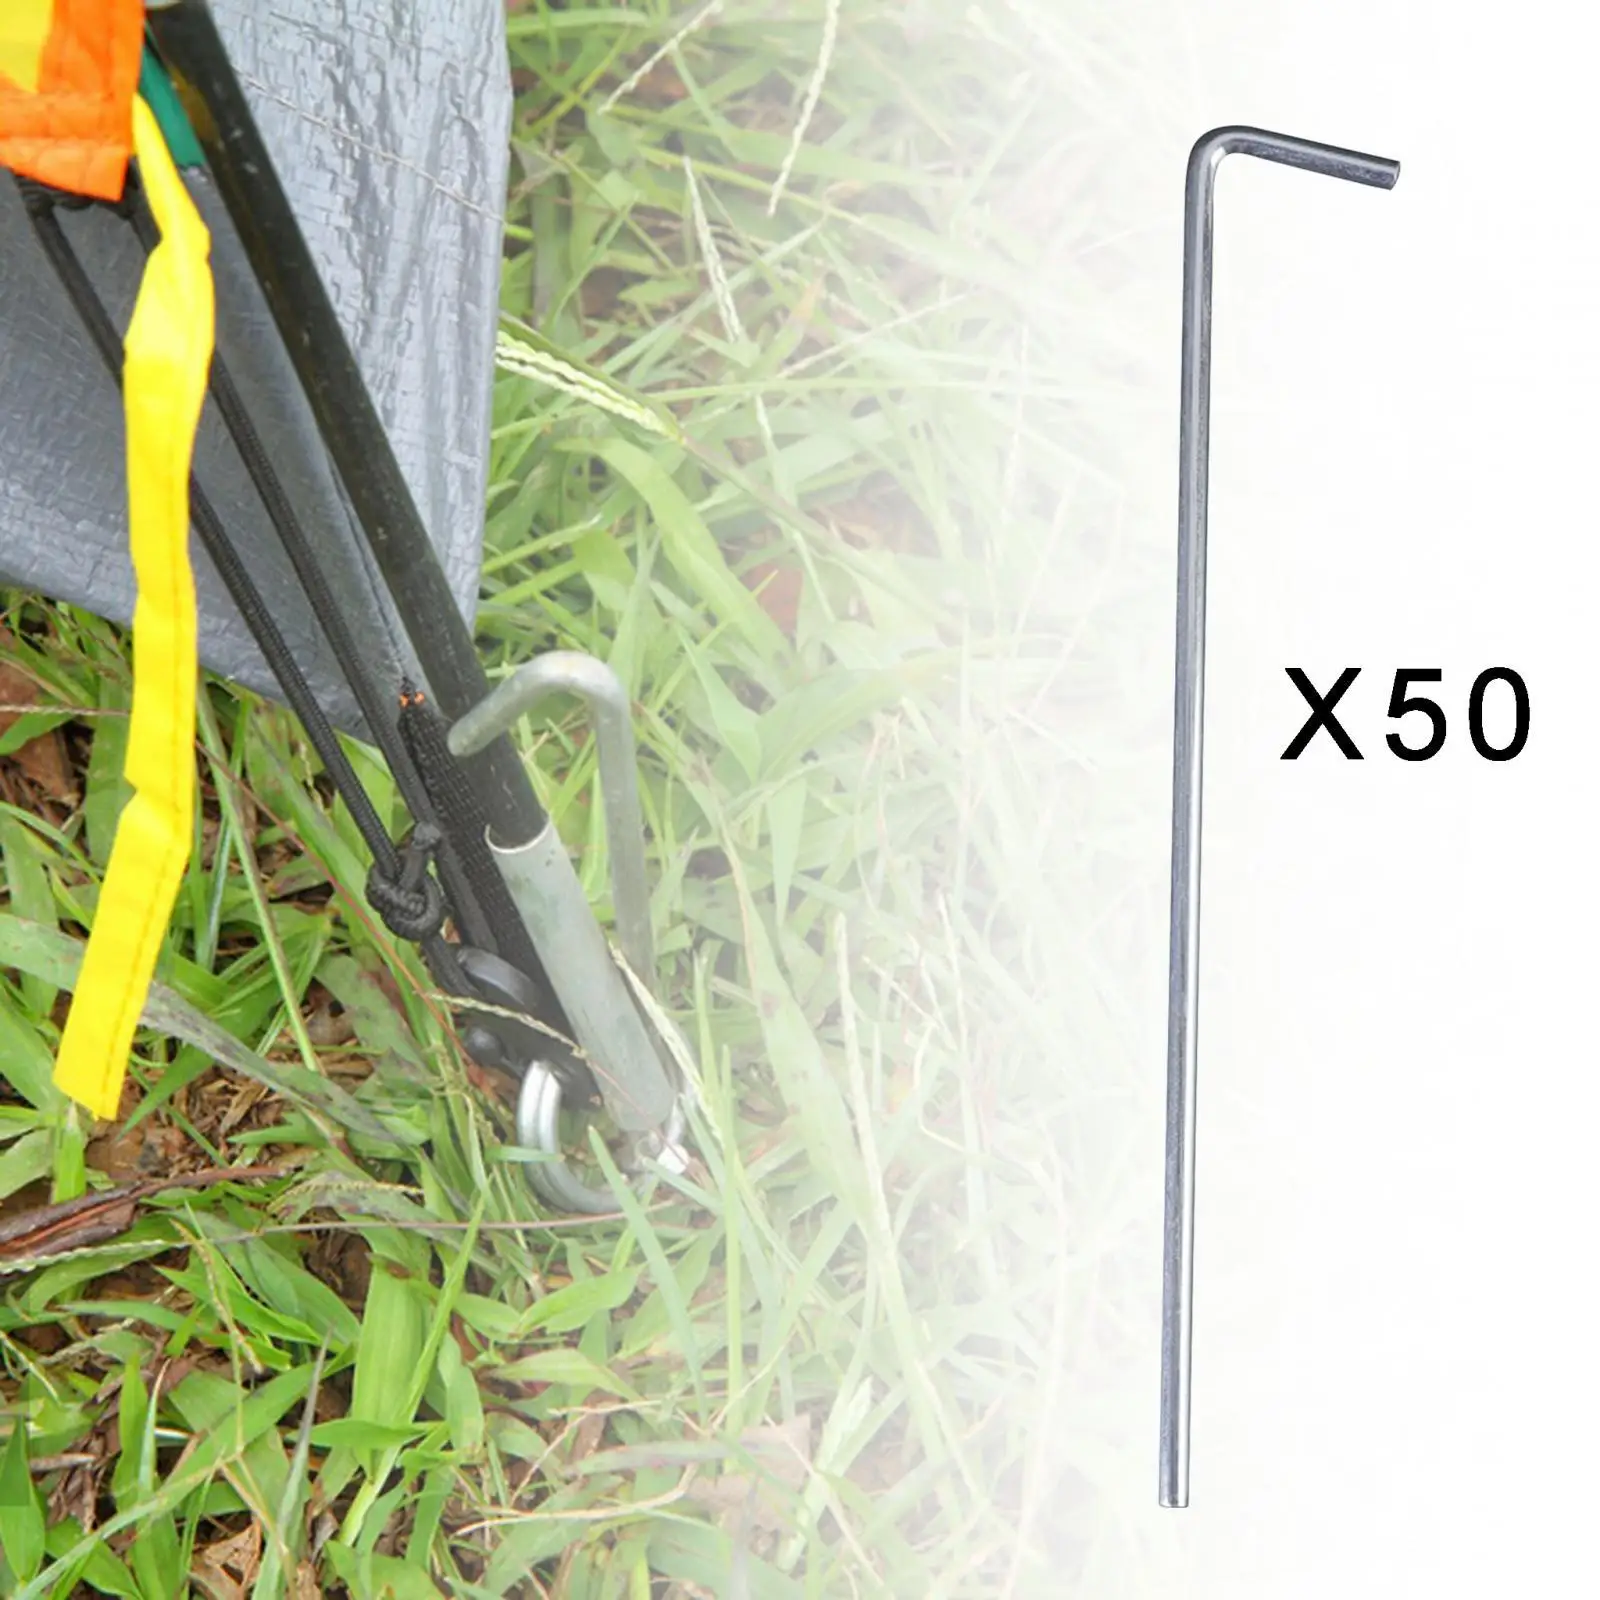 50Pcs Tent Pegs 20cm Garden Stakes Nails Aluminum for Hard Floors Rust Proof Accessory Ground Spikes Multifunctional Durable